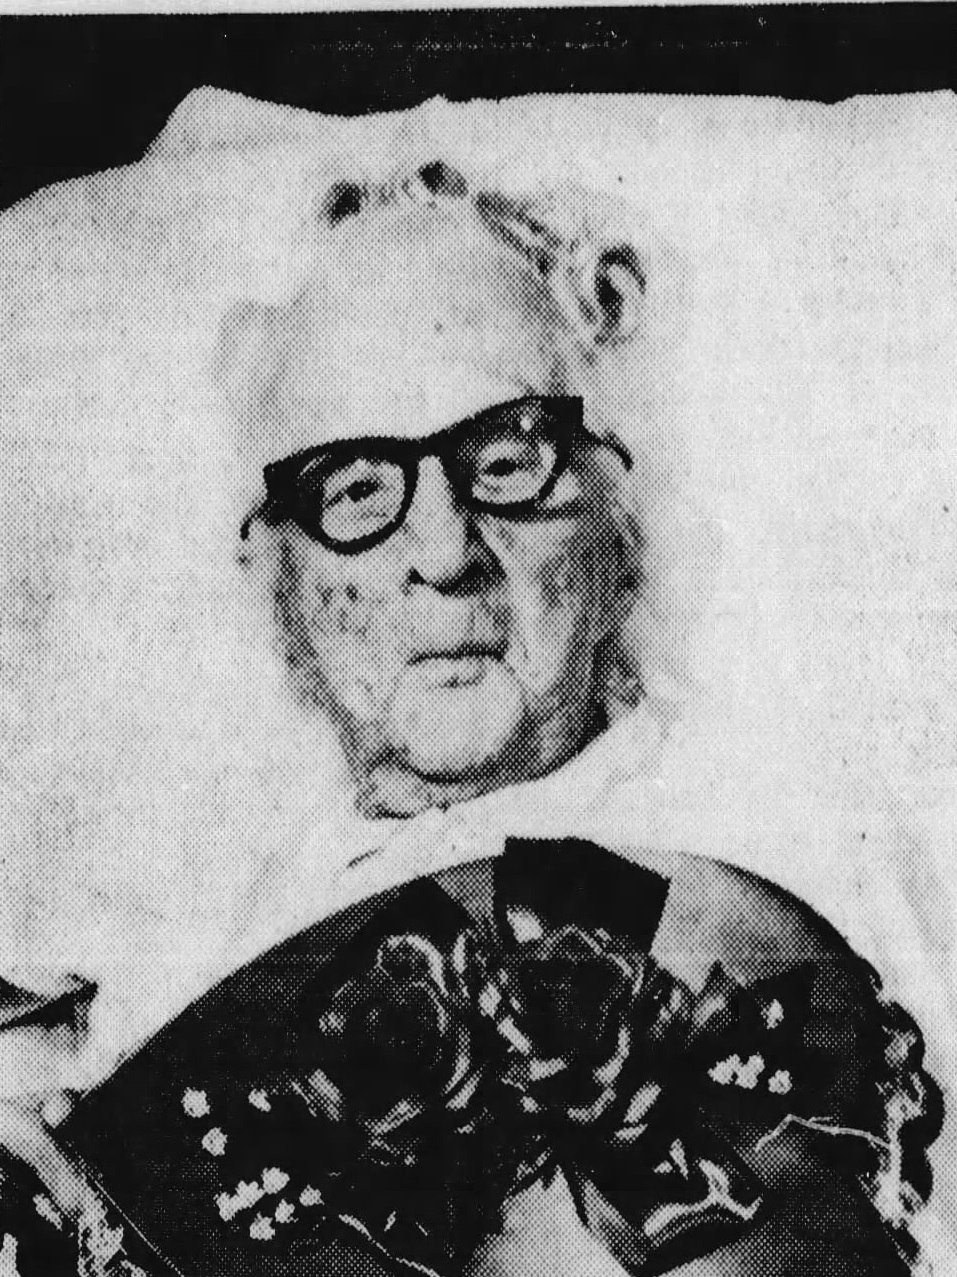 On her 109th birthday in 1971. (Source: Concord Transcript, 15 February 1971)